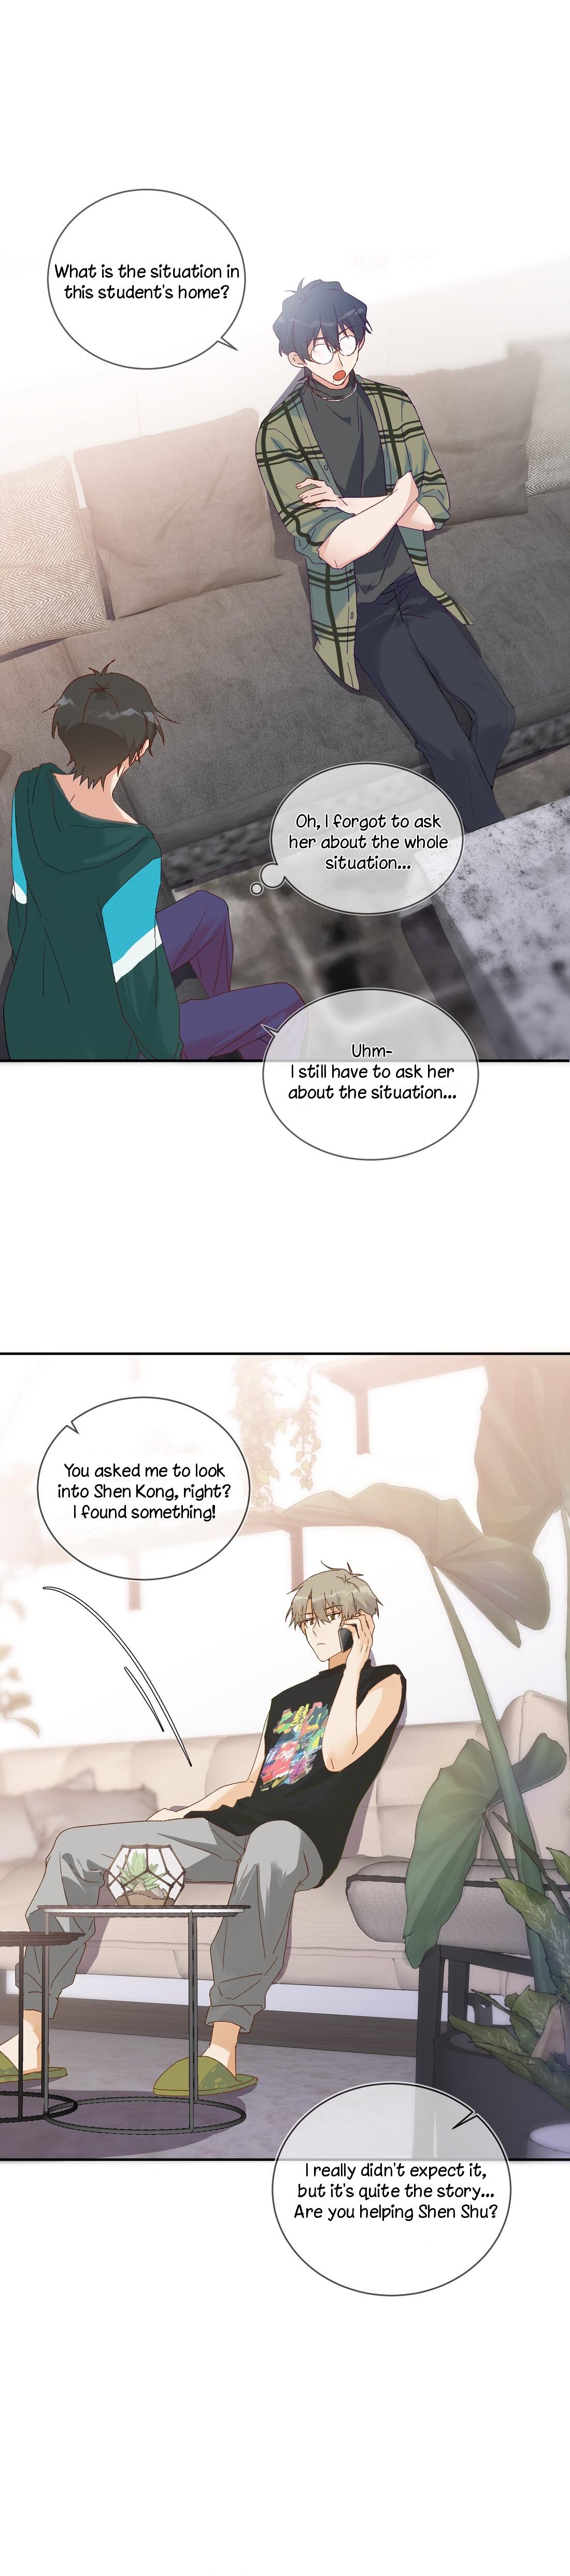 I Want To Hear Your Confession - Page 2